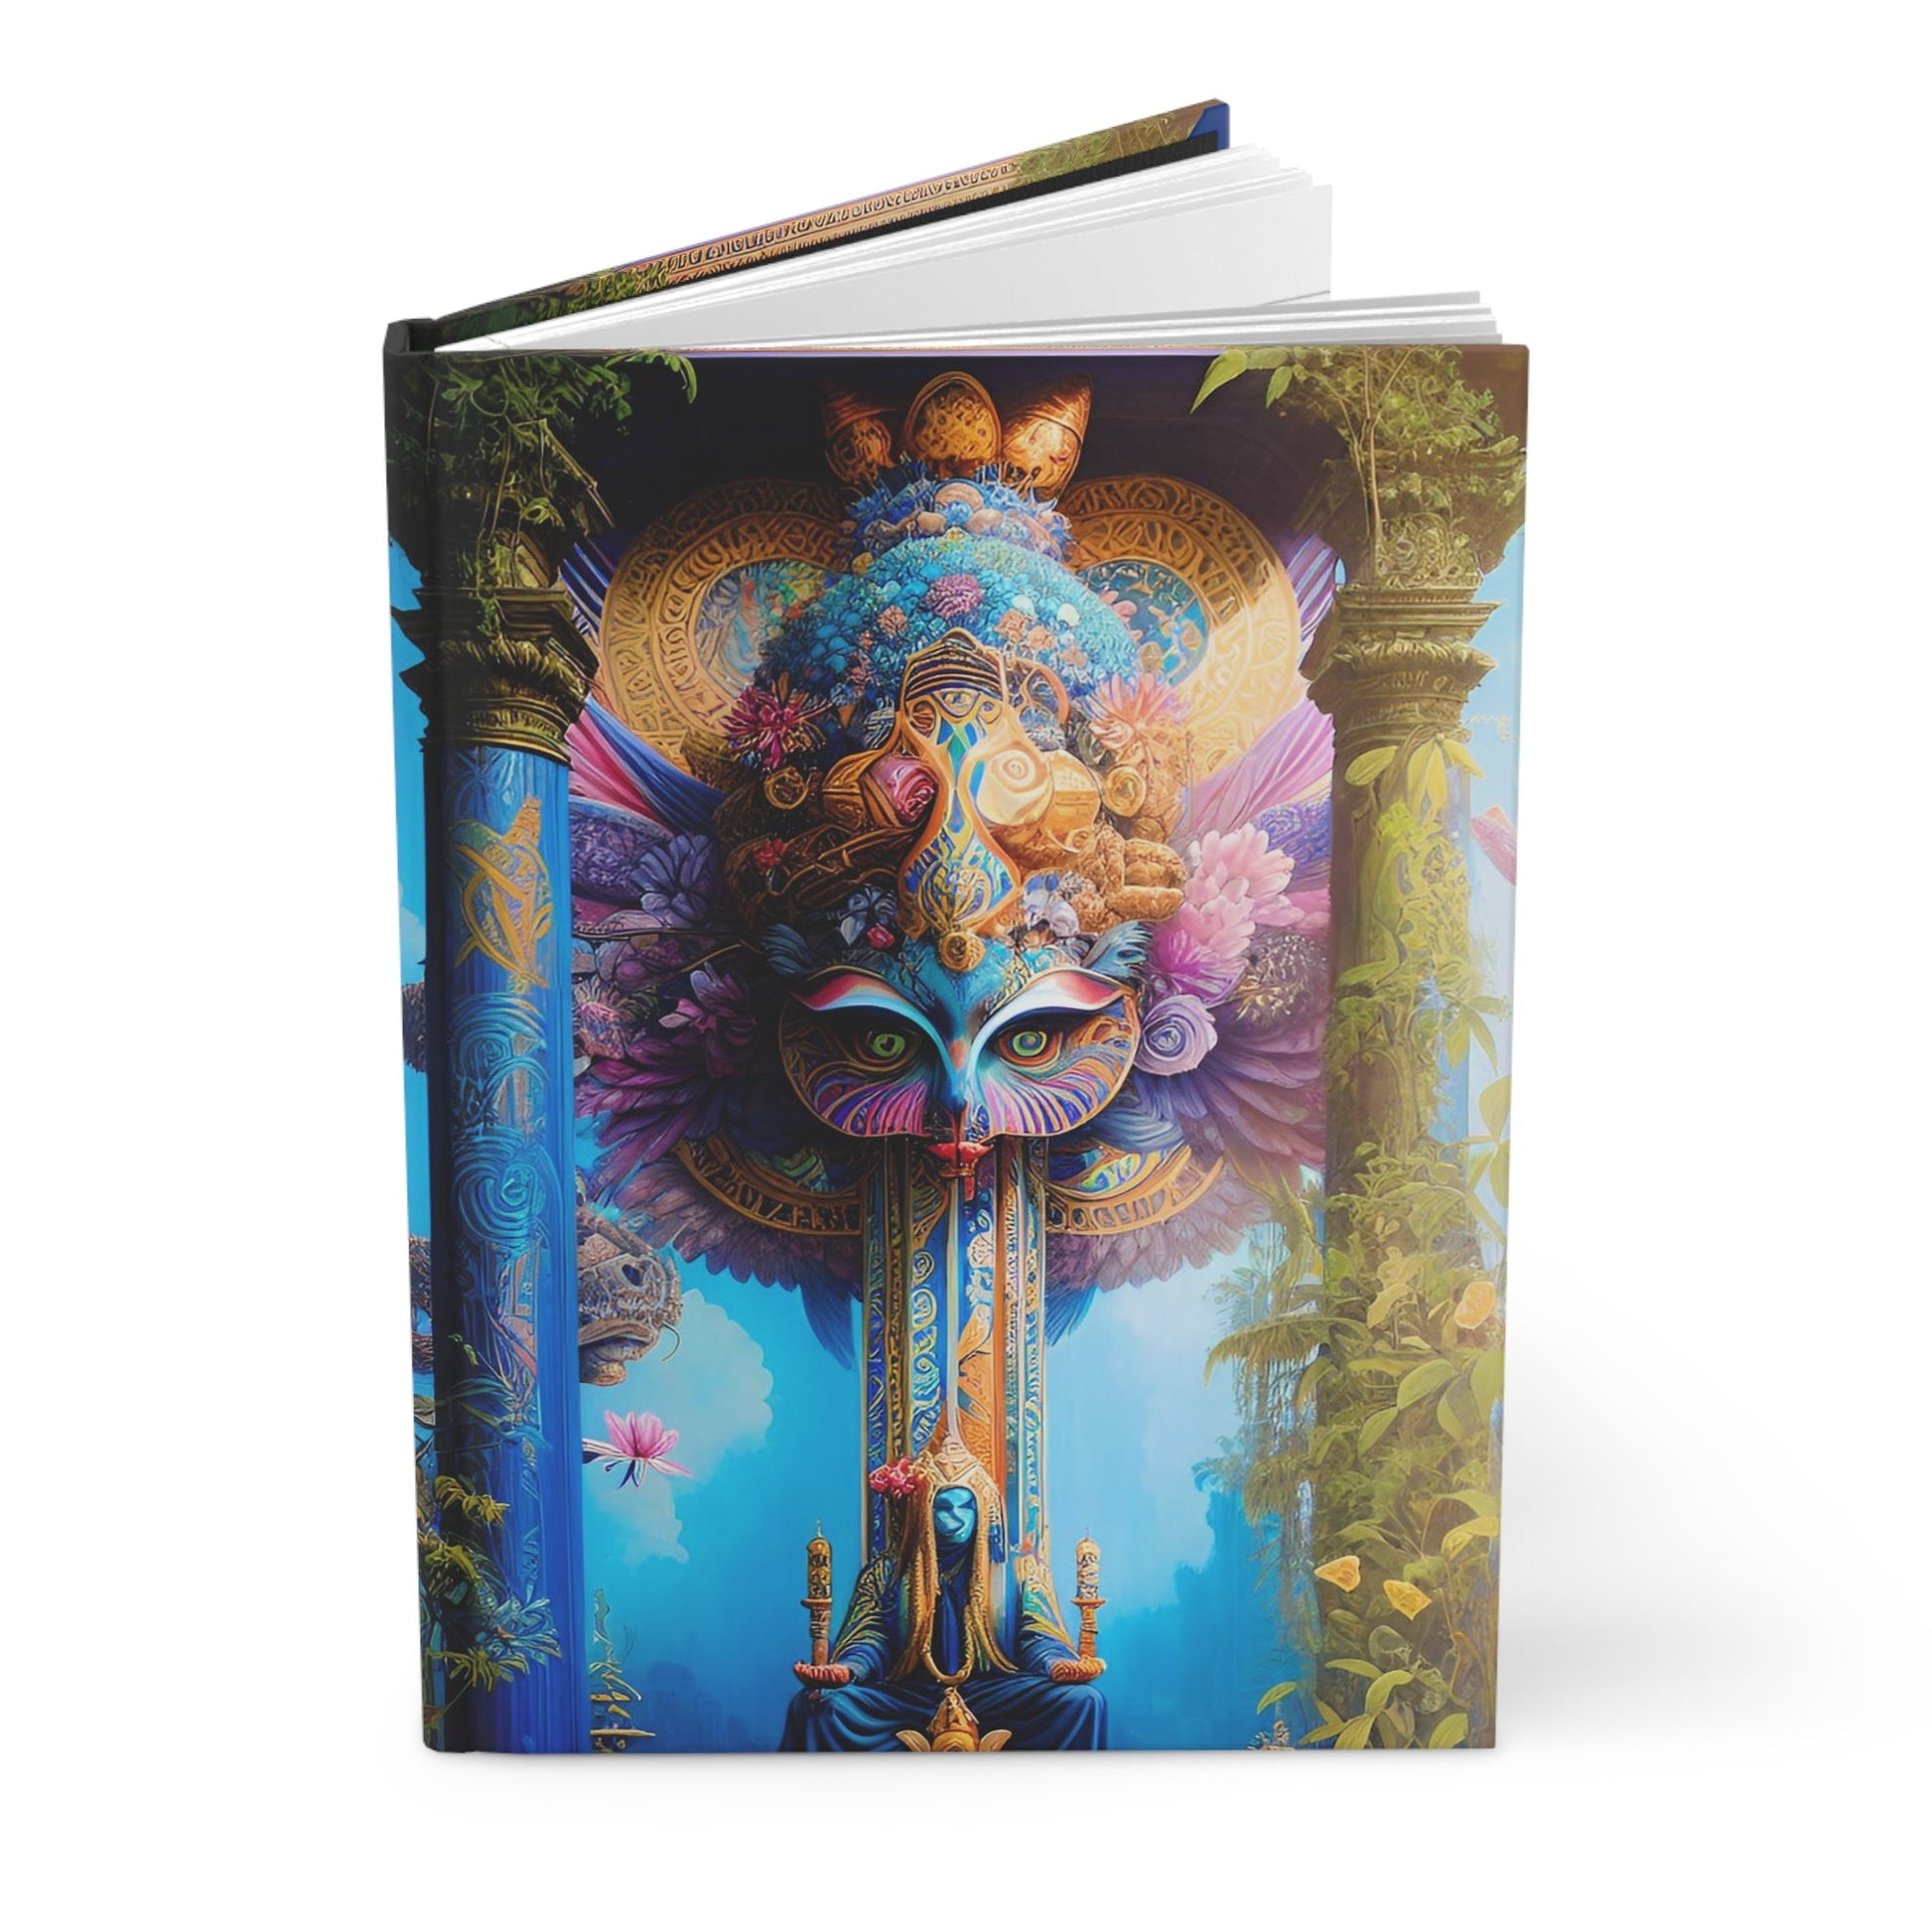 CrazyYetiClothing, CYC, The Mask (Hardcover Journal w/ Matte Finish), Paper products